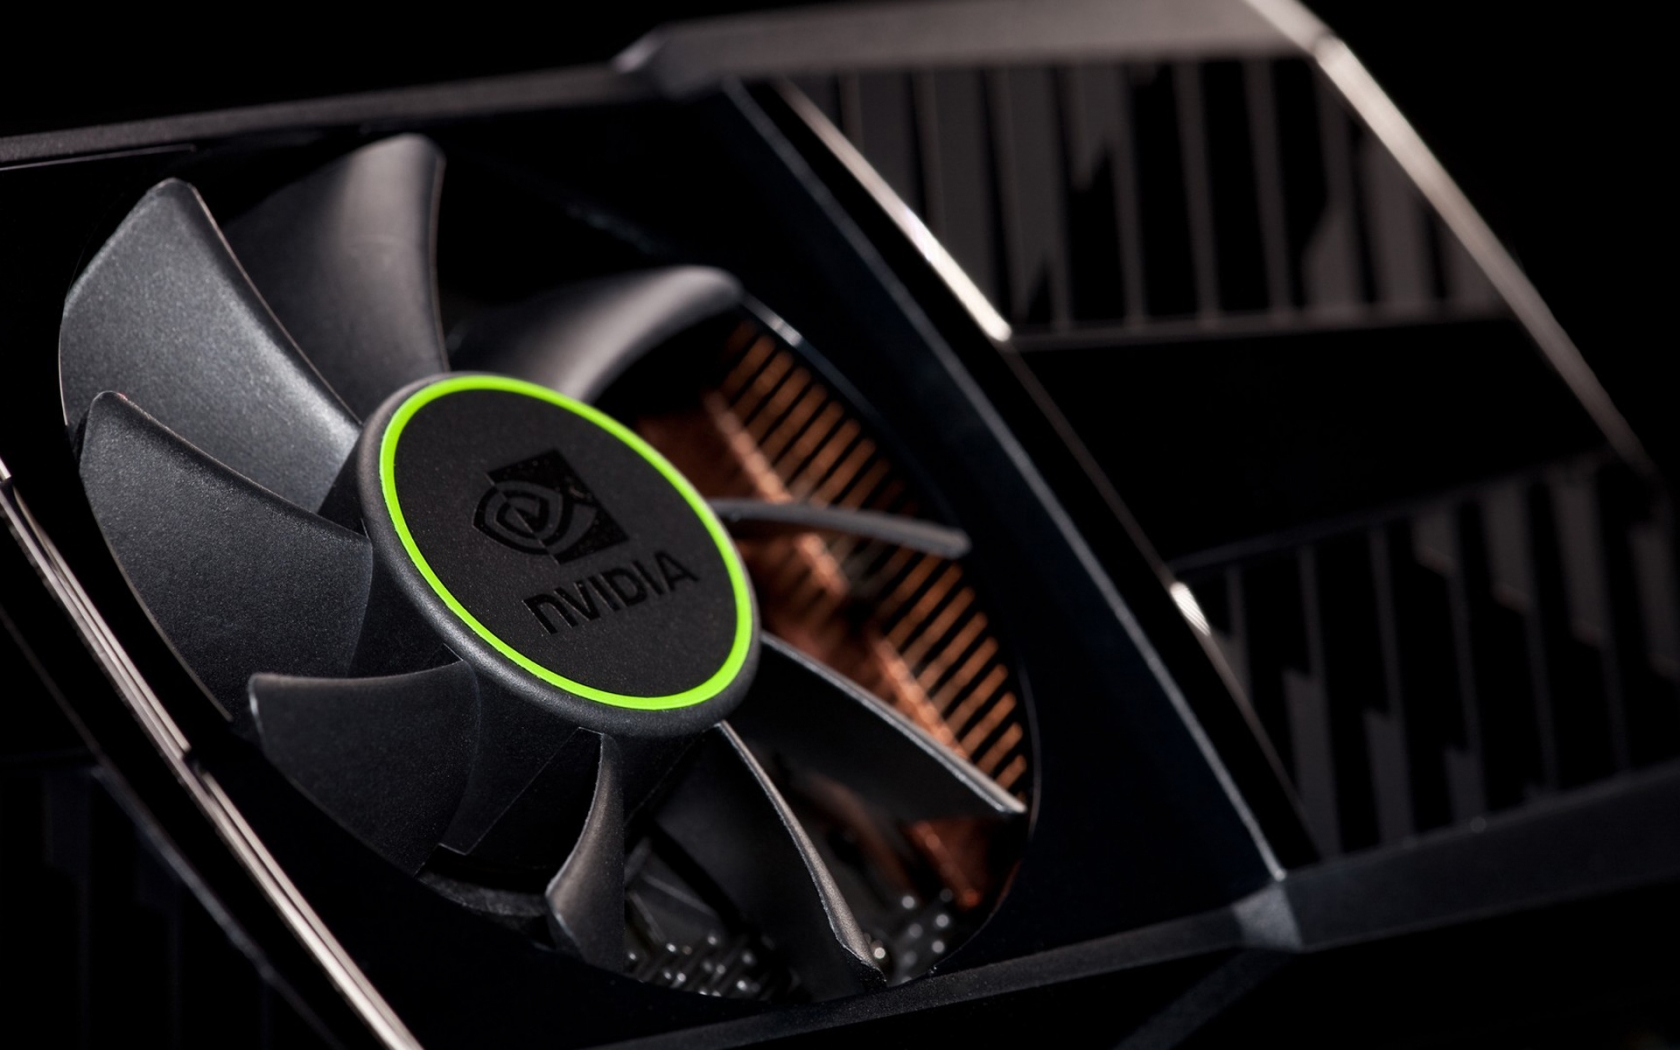 nVidia Cooler for 1680 x 1050 widescreen resolution